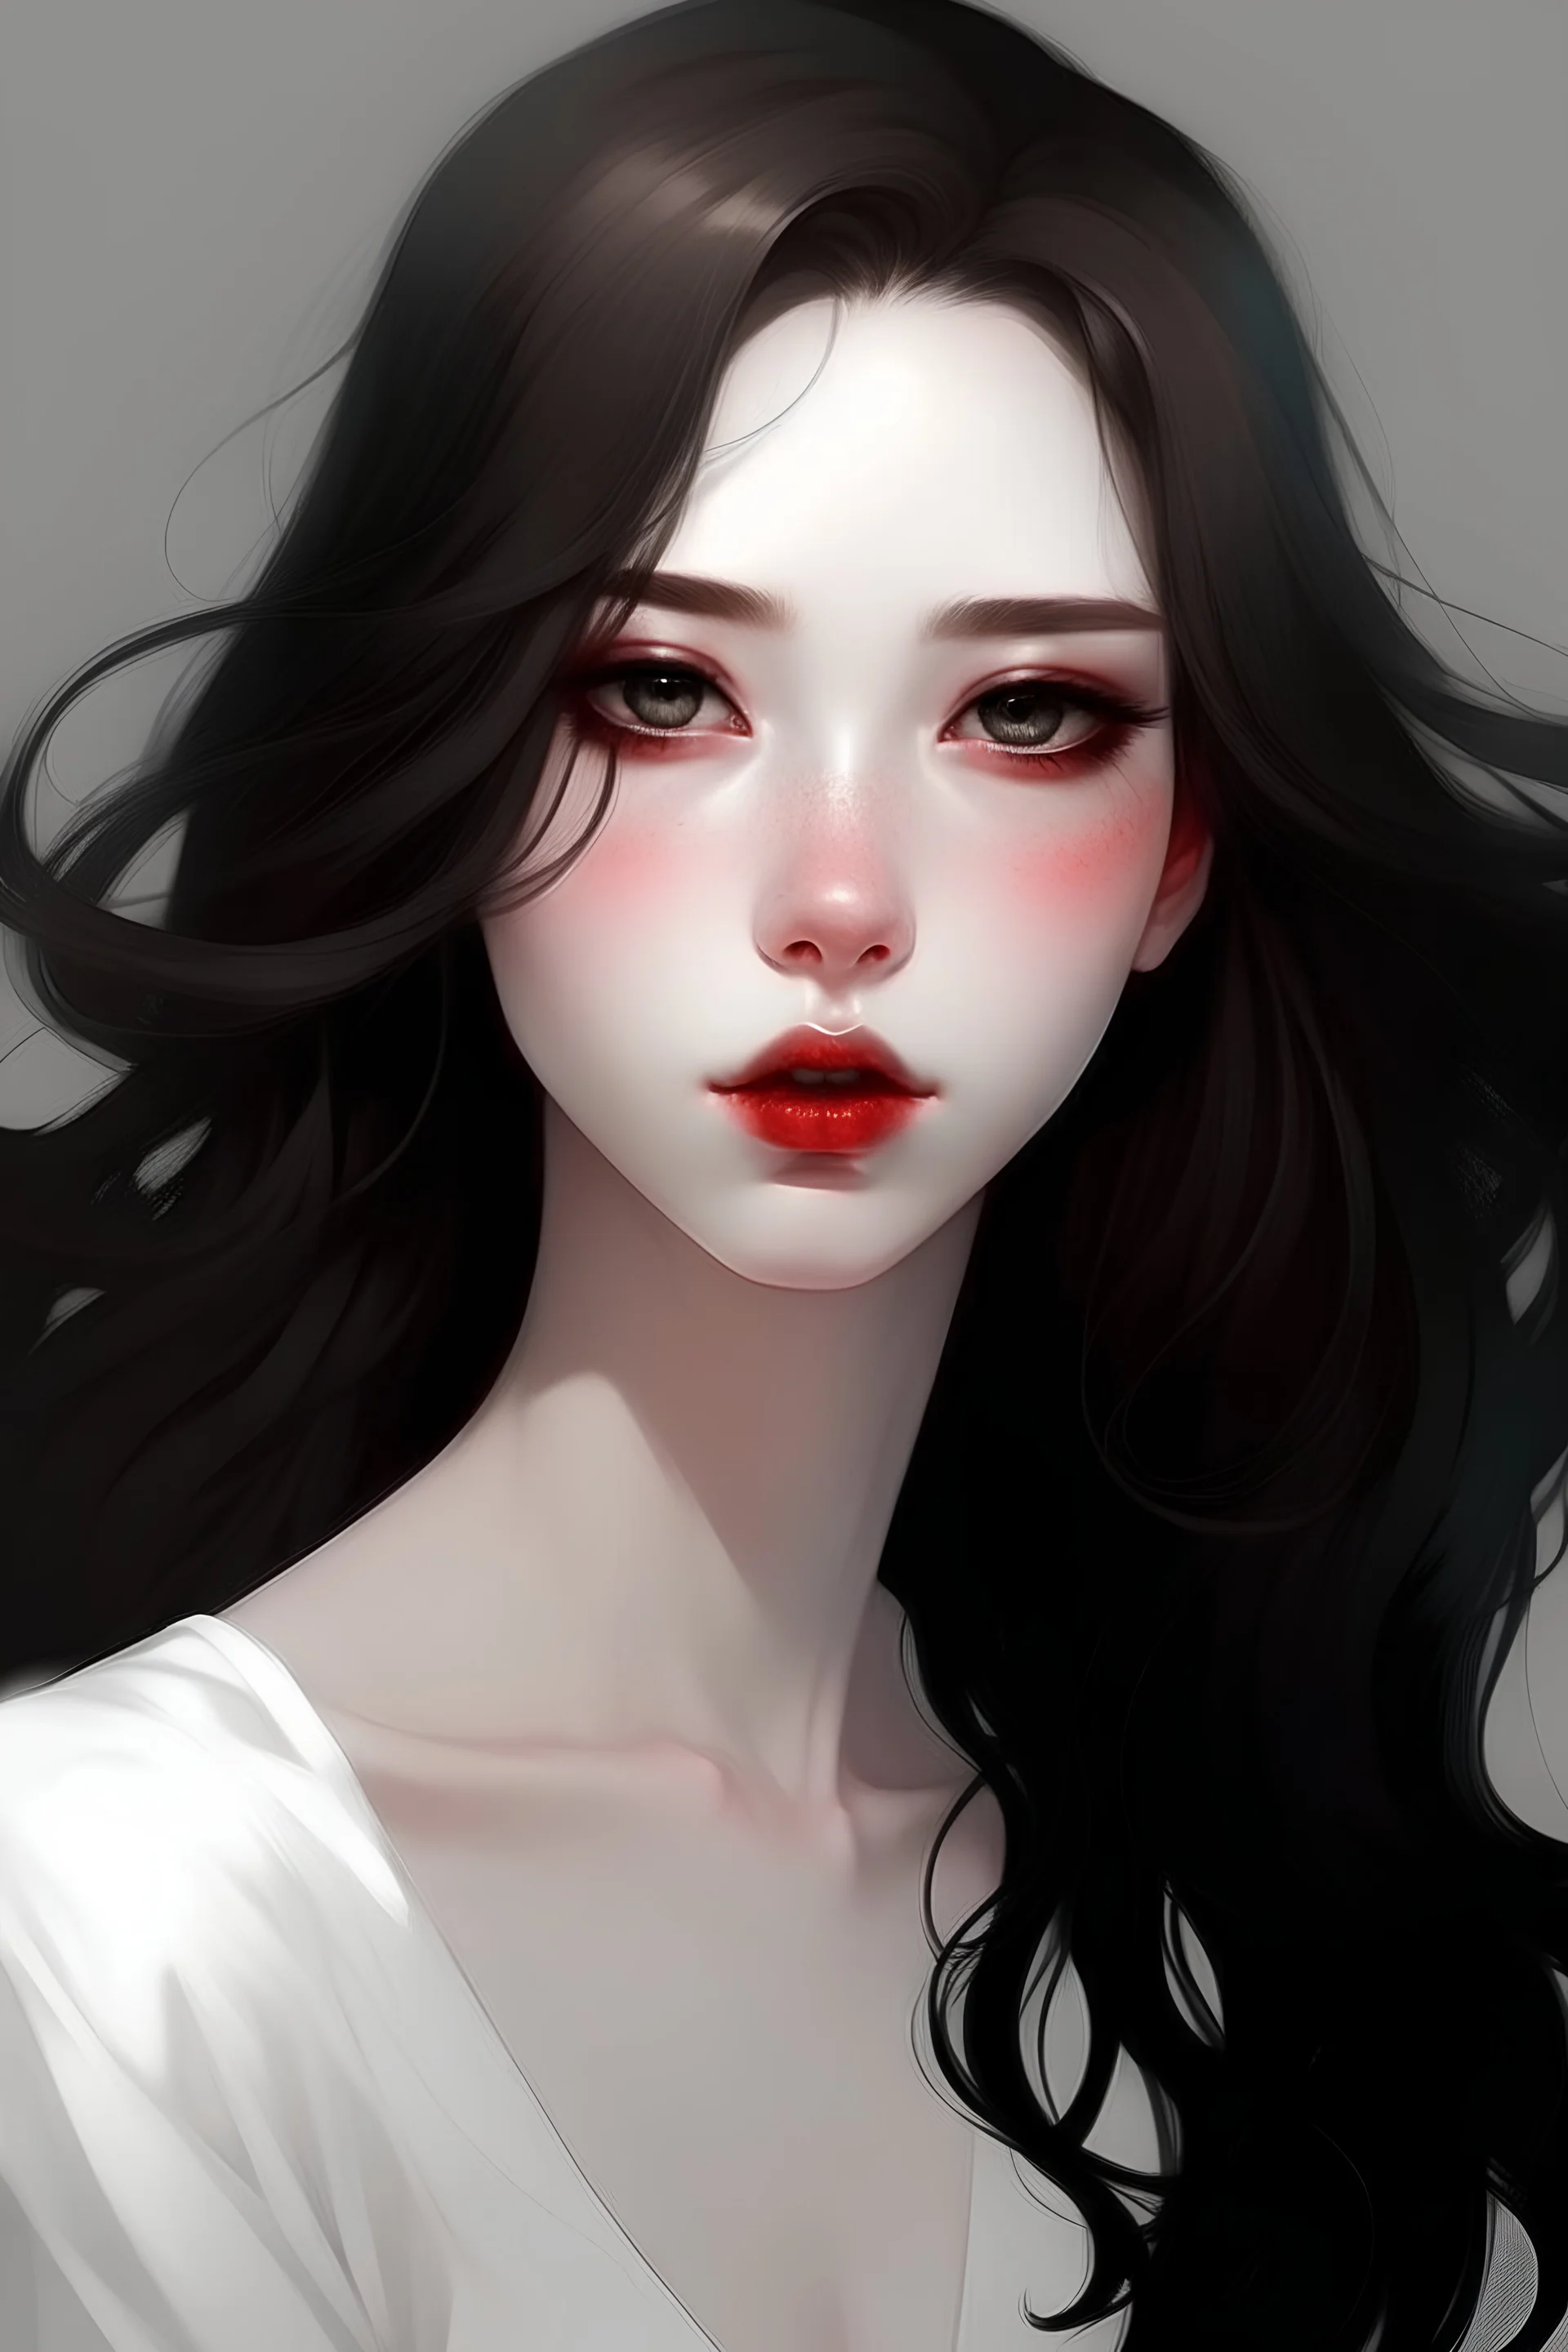 A girl with sharp, beautiful features. Her skin is pale white. Her eyes are red and black color. Her body is slim and long. Her hair is black and wavy.